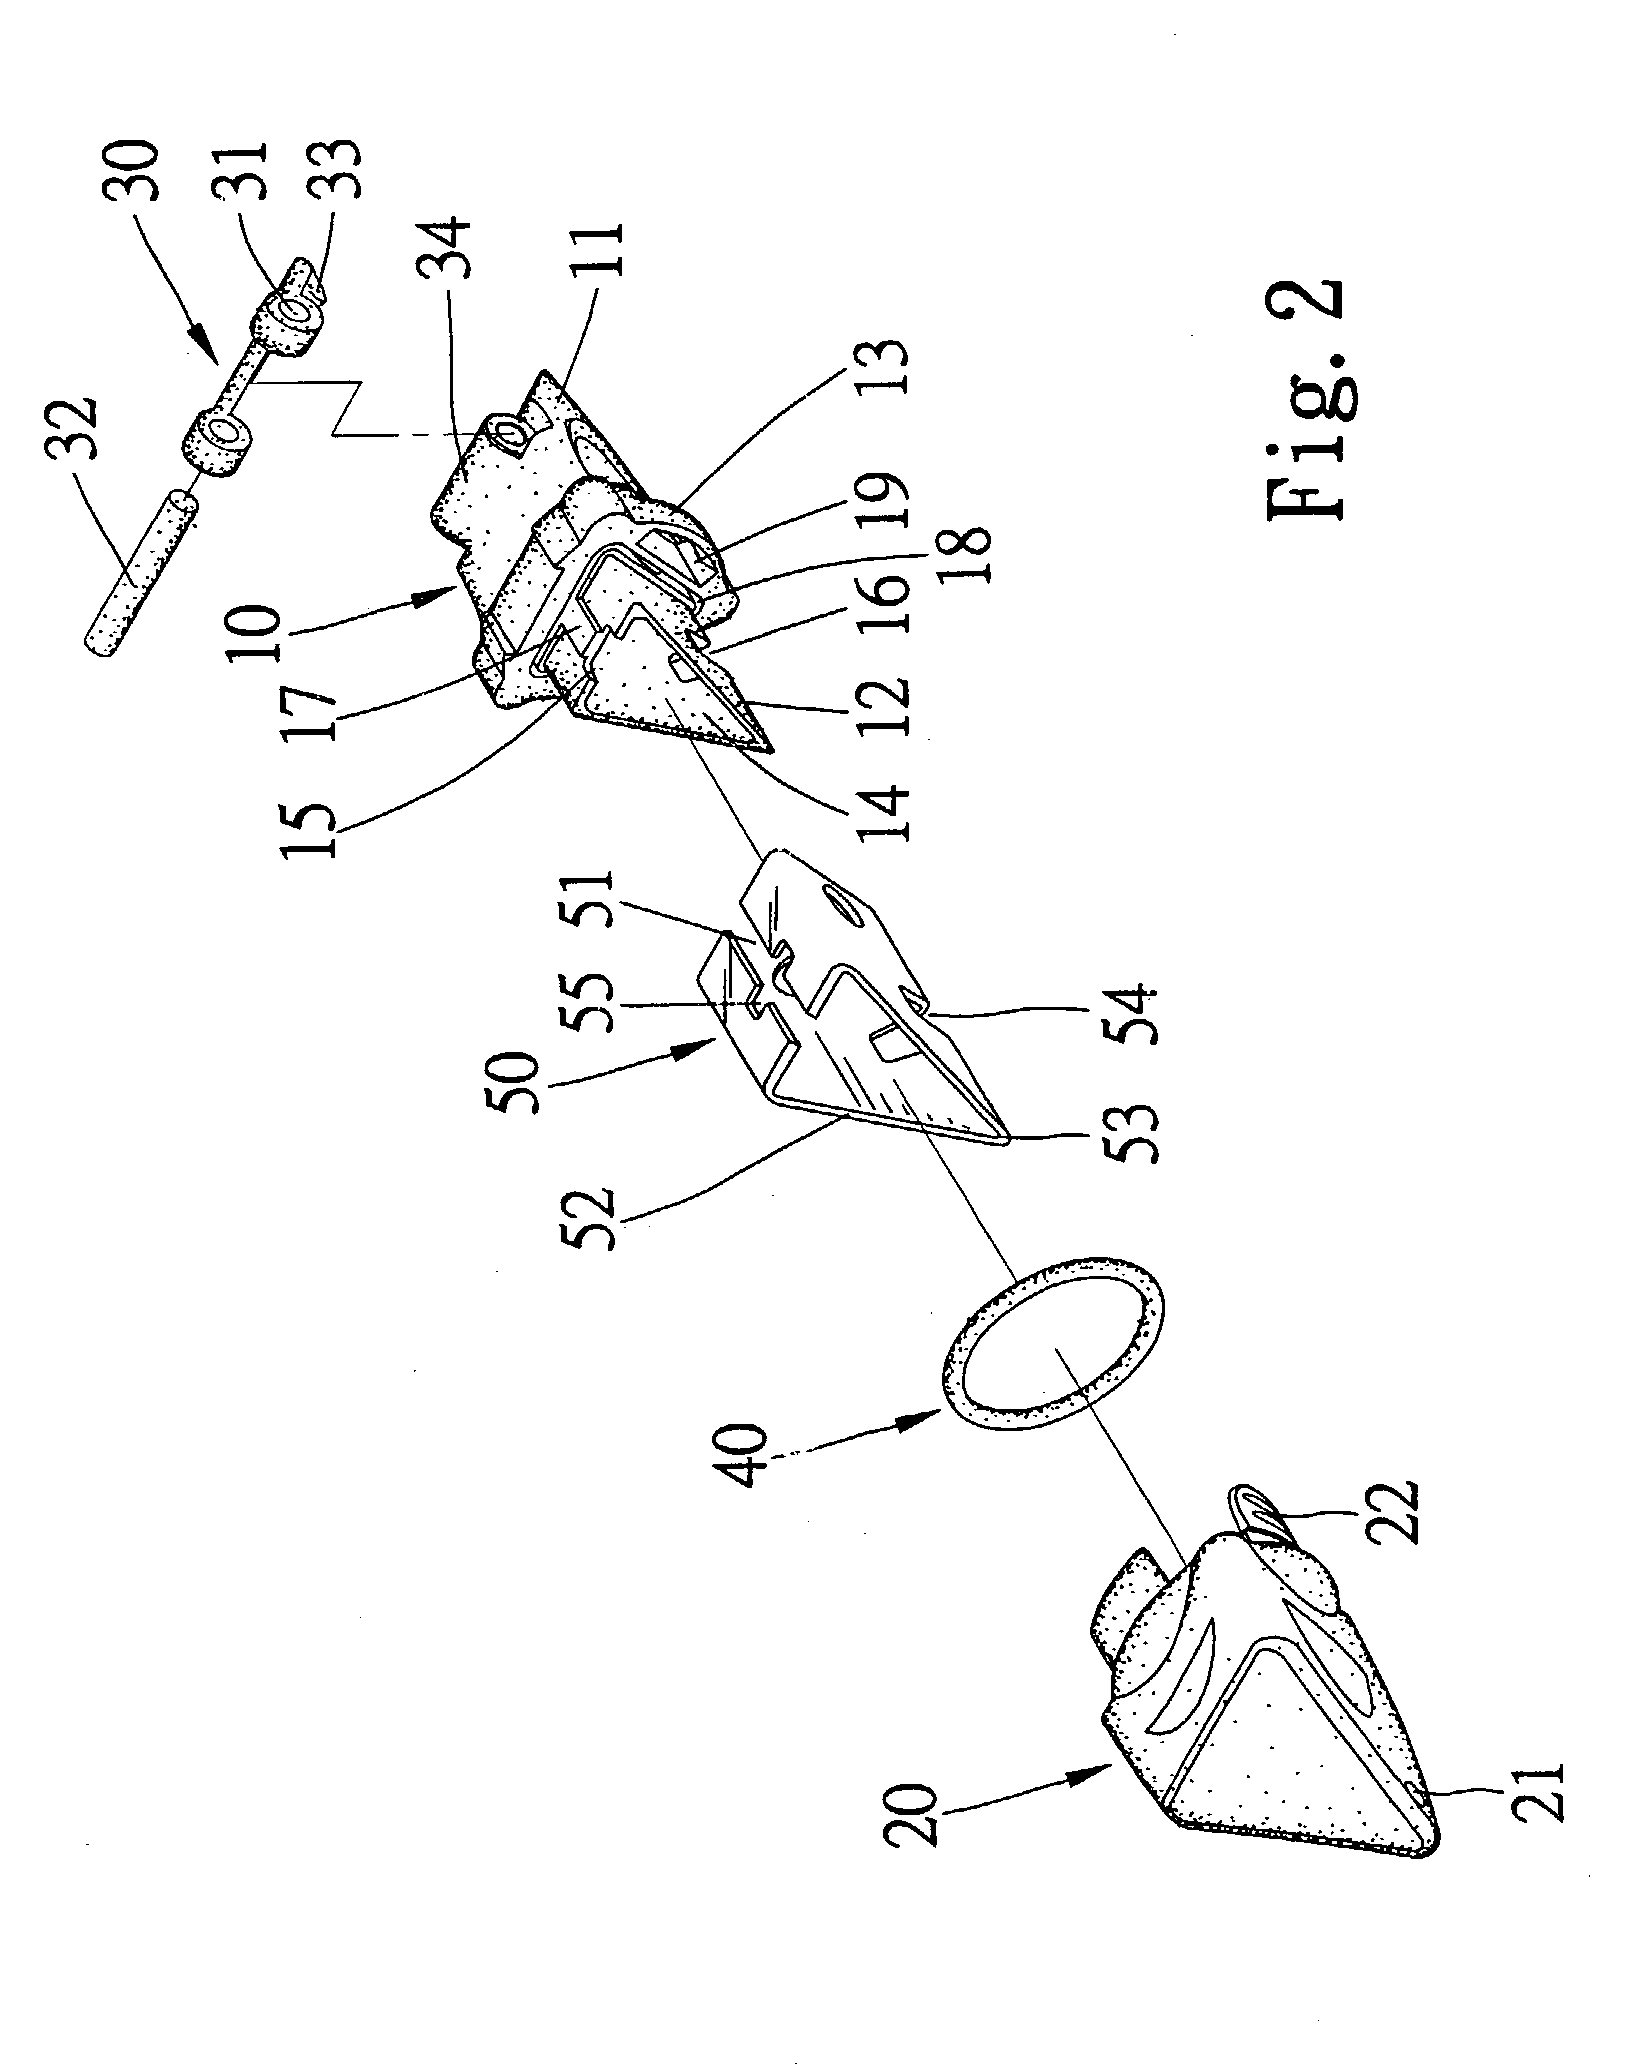 Dispensing apparatus for pack of drink